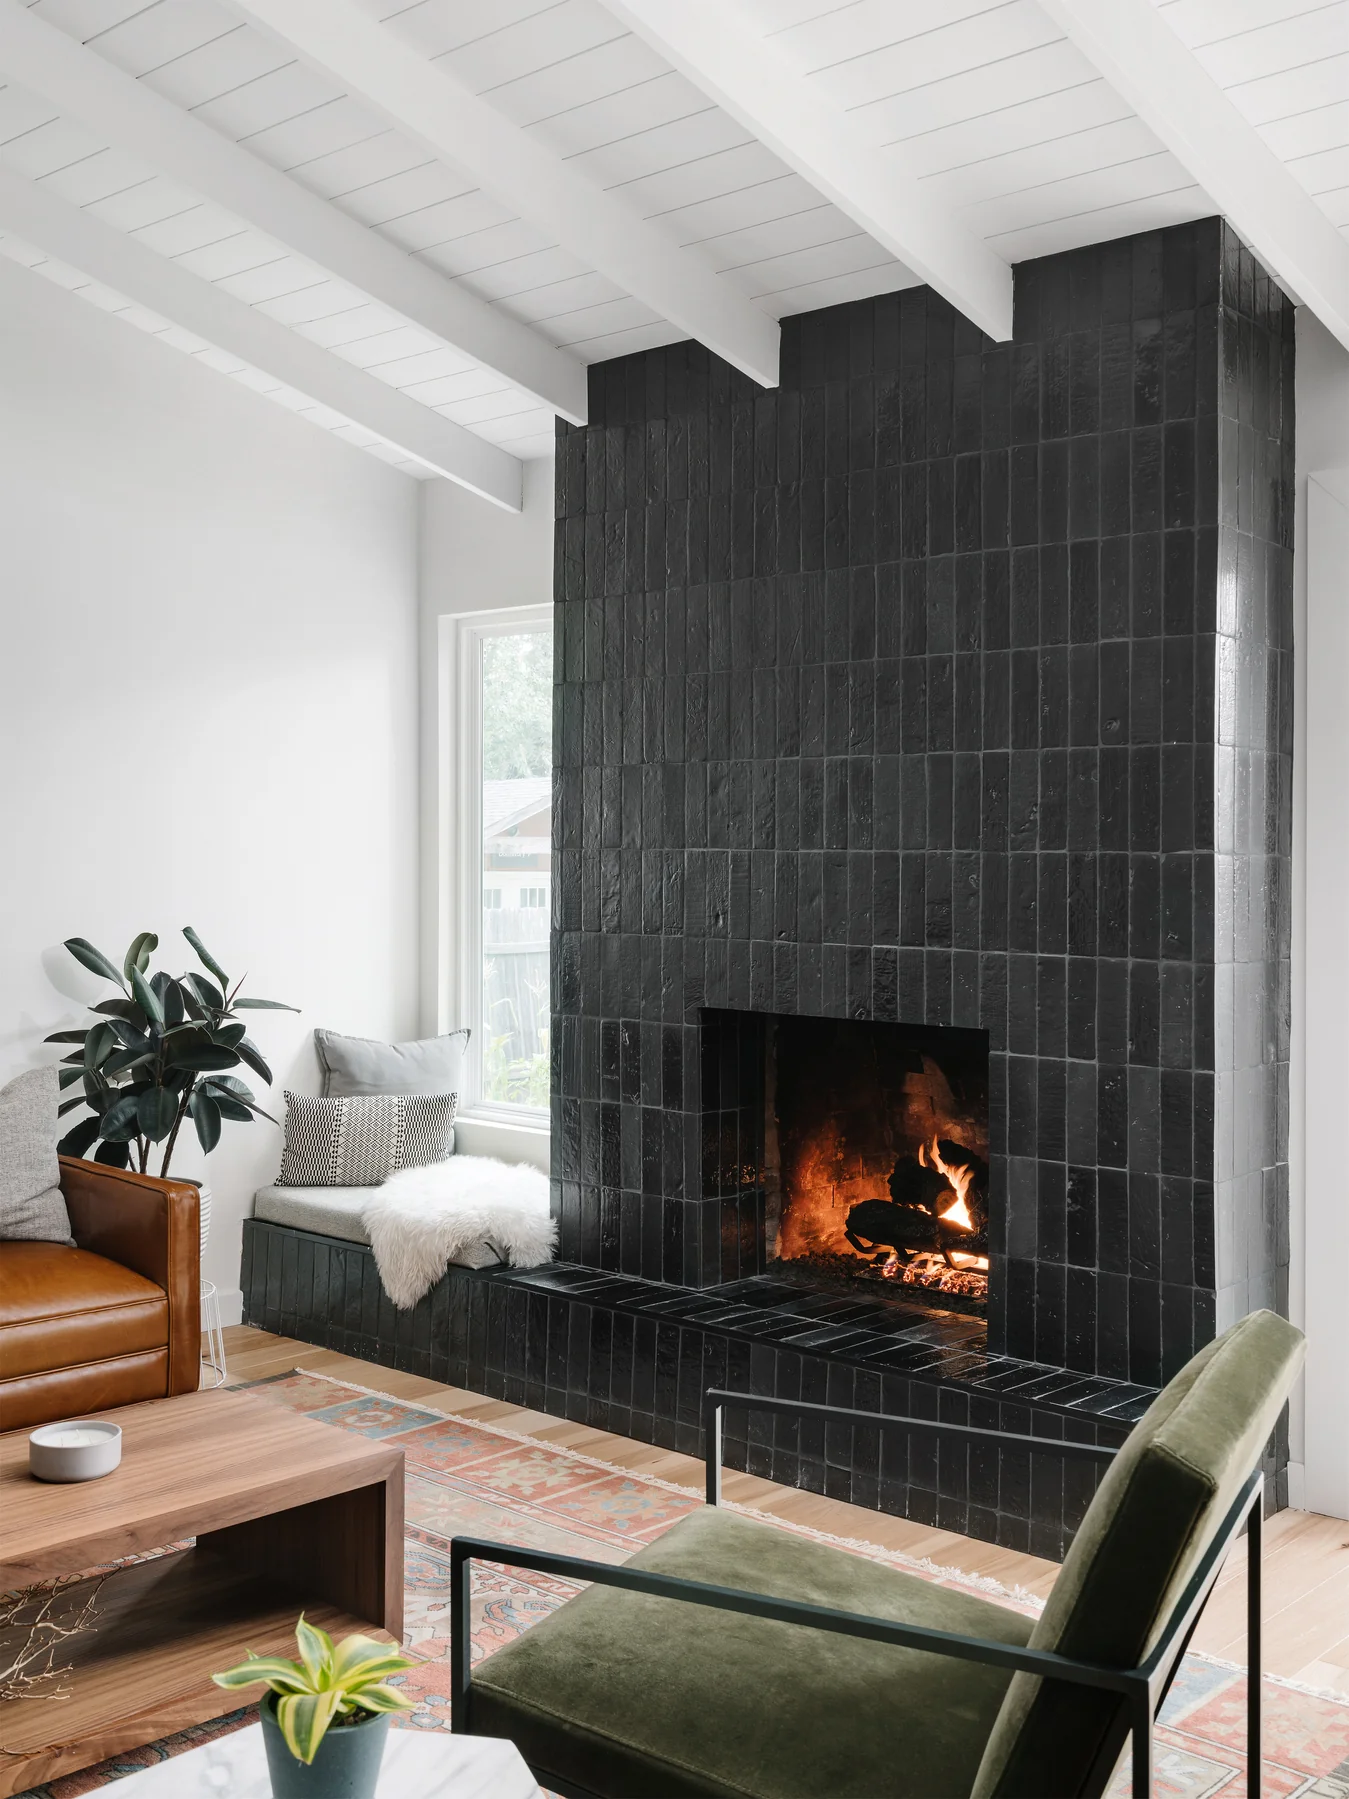 Modern fireplace design with black tiles